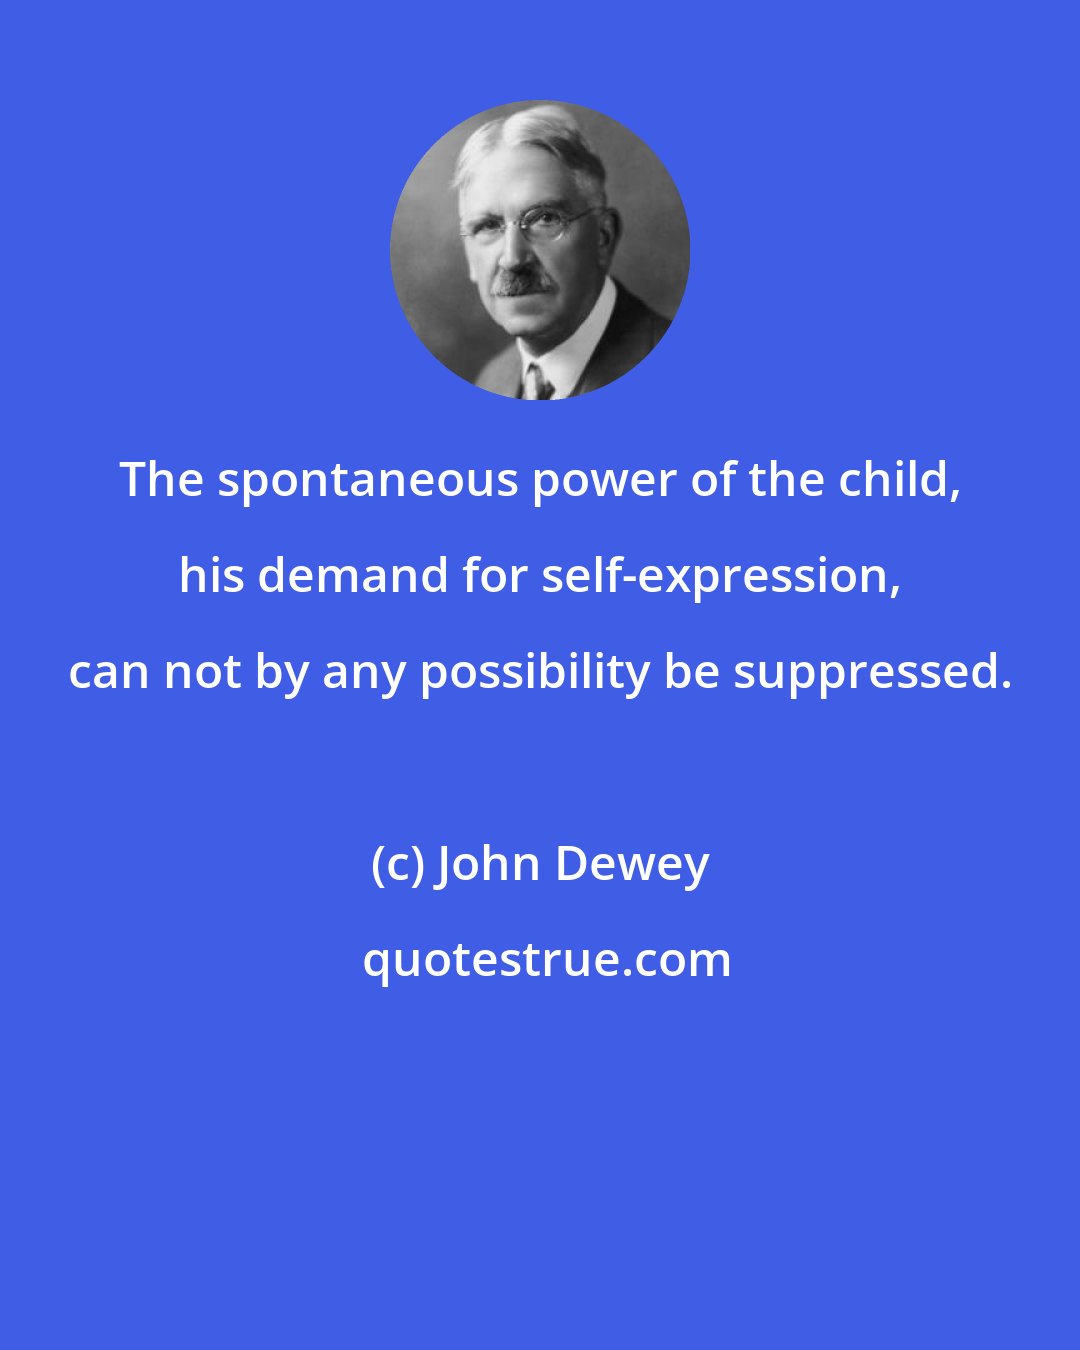 John Dewey: The spontaneous power of the child, his demand for self-expression, can not by any possibility be suppressed.